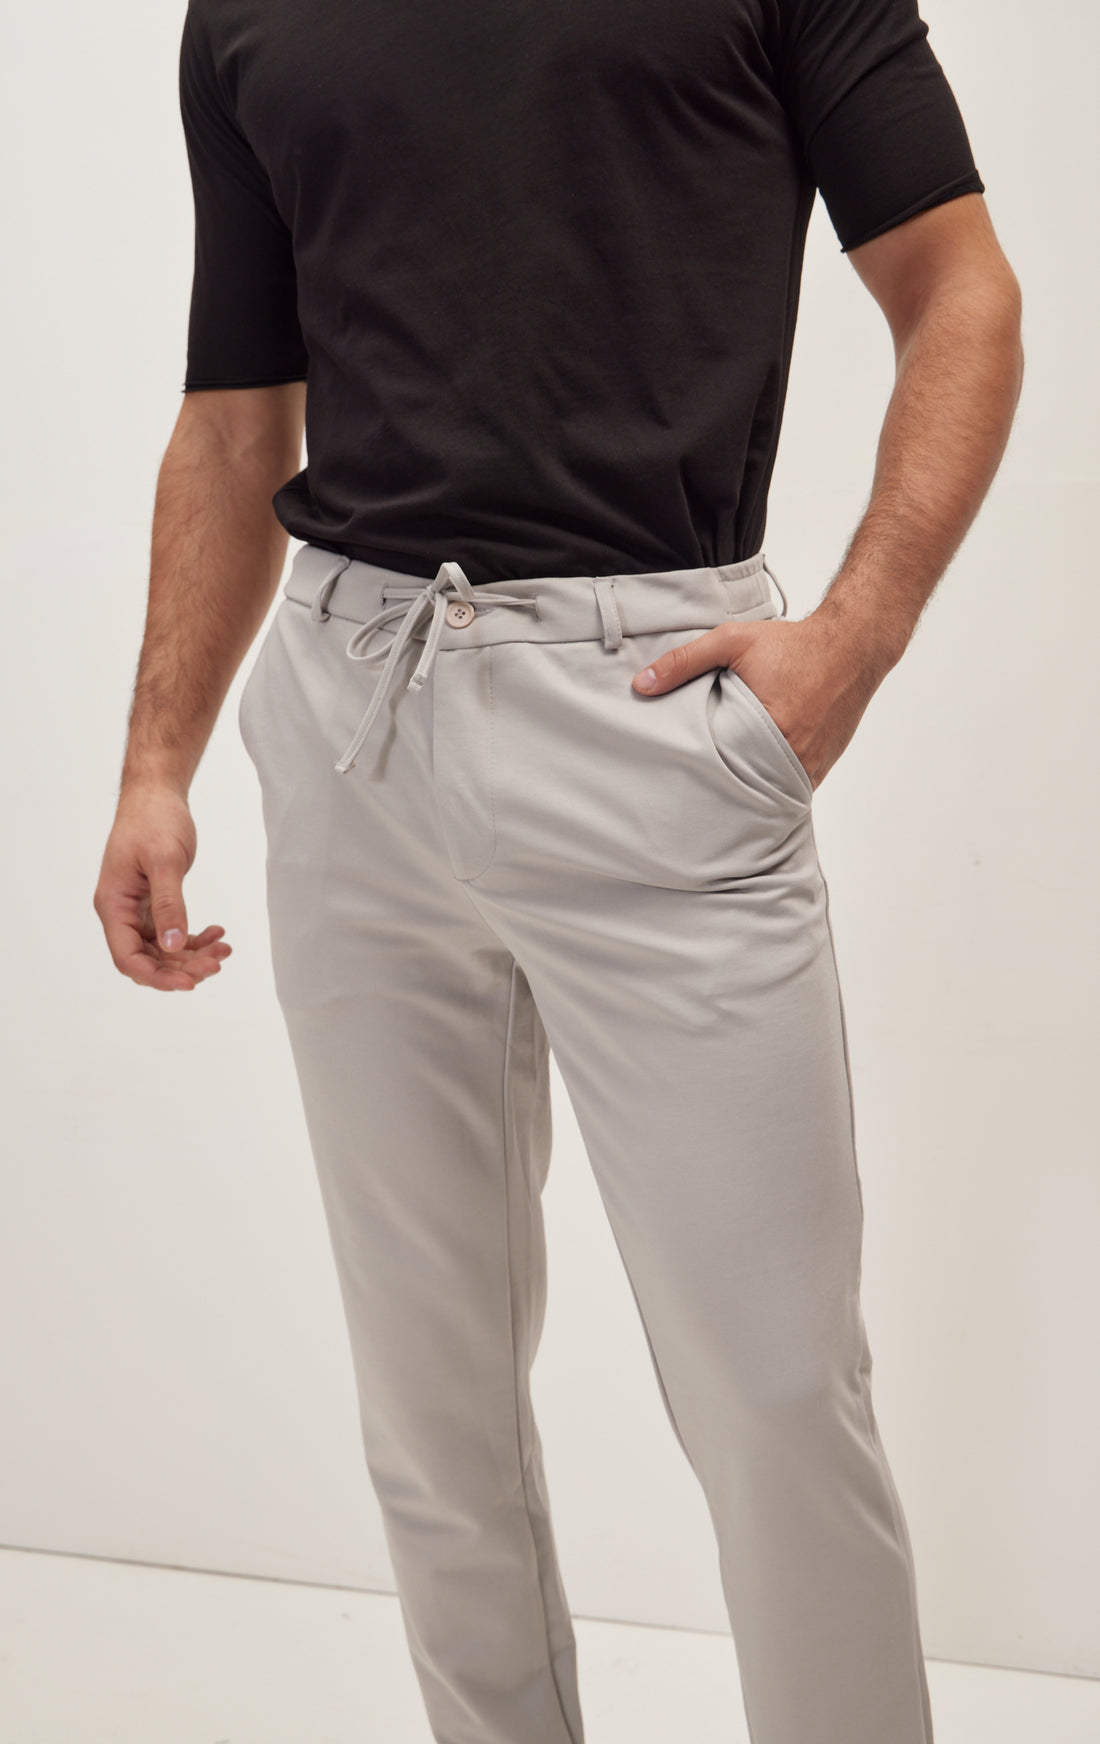 Fitted Casual Everyday Pants - Grey